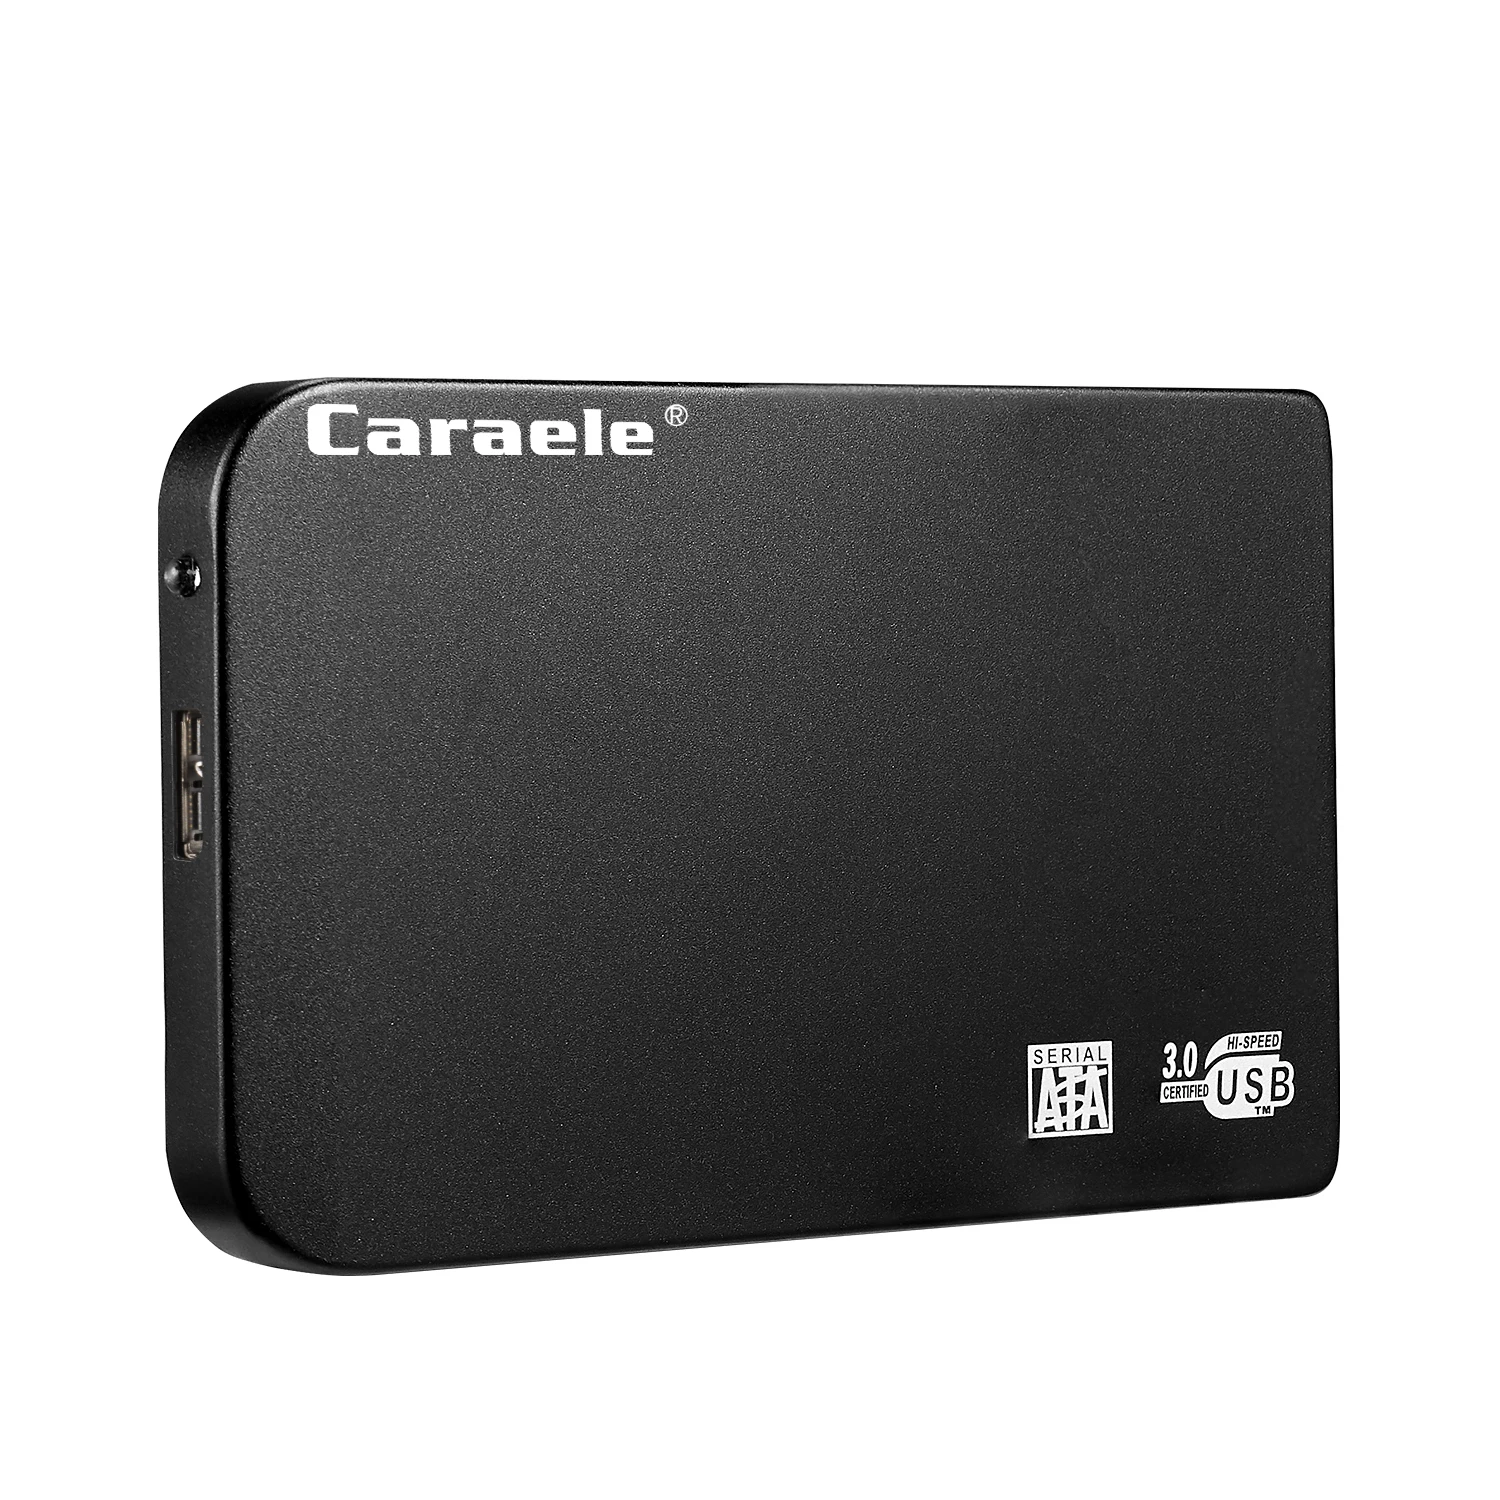 Caraele H6 Portable SSD HARD DRIVE 2TB 1TB 500GB External Hard Drive Disk Storage Devices USB3.0 hd externo for Computer,Laptops